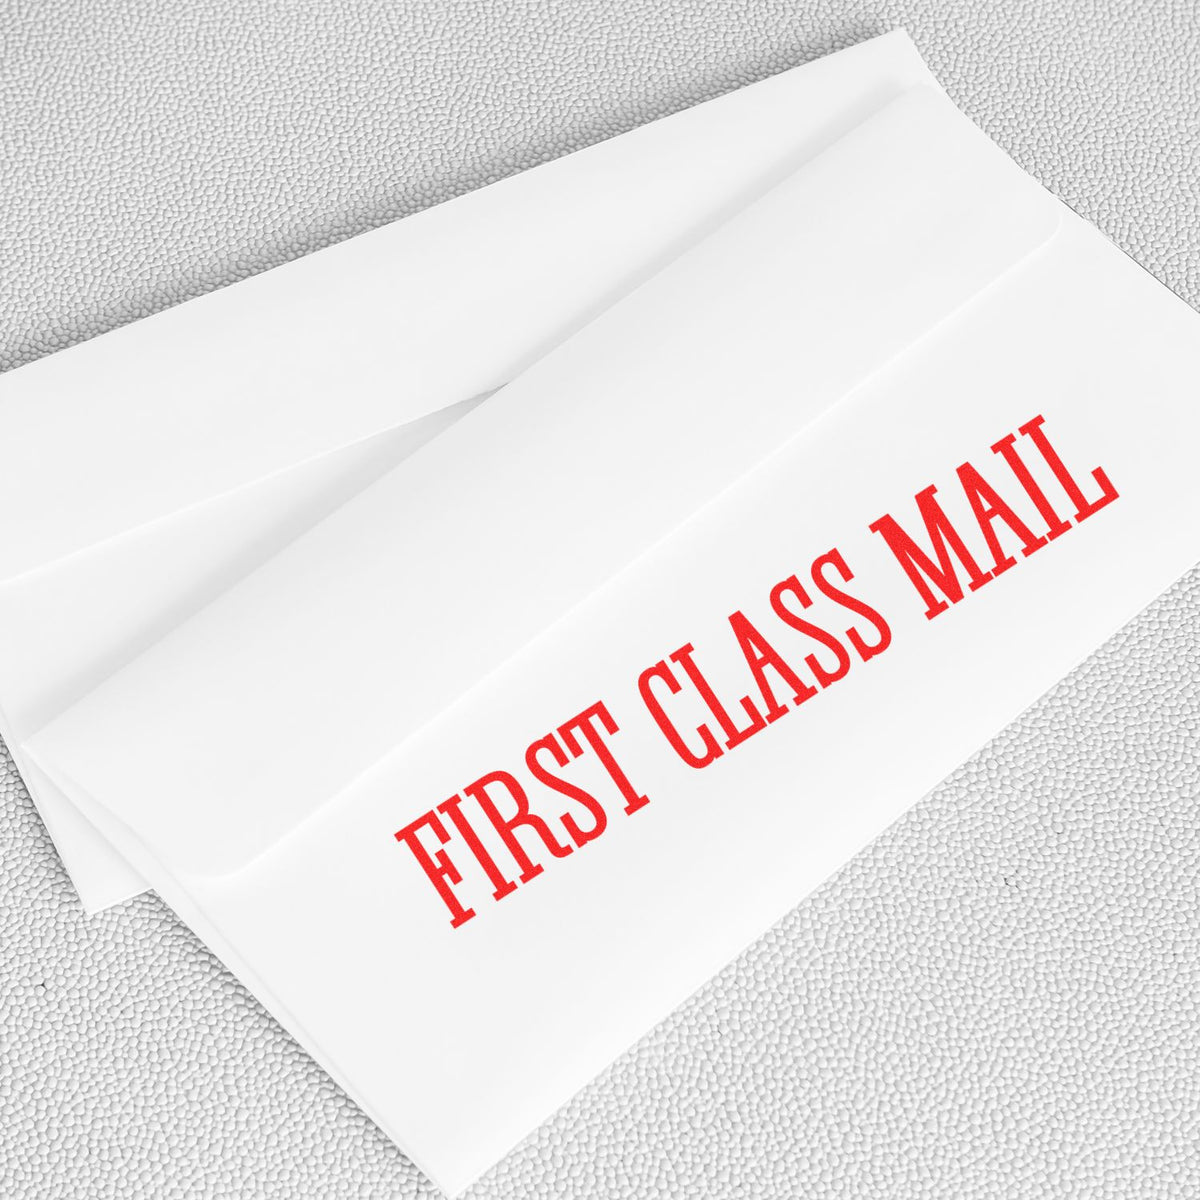 Large Pre-Inked Times First Class Mail Stamp In Use Photo